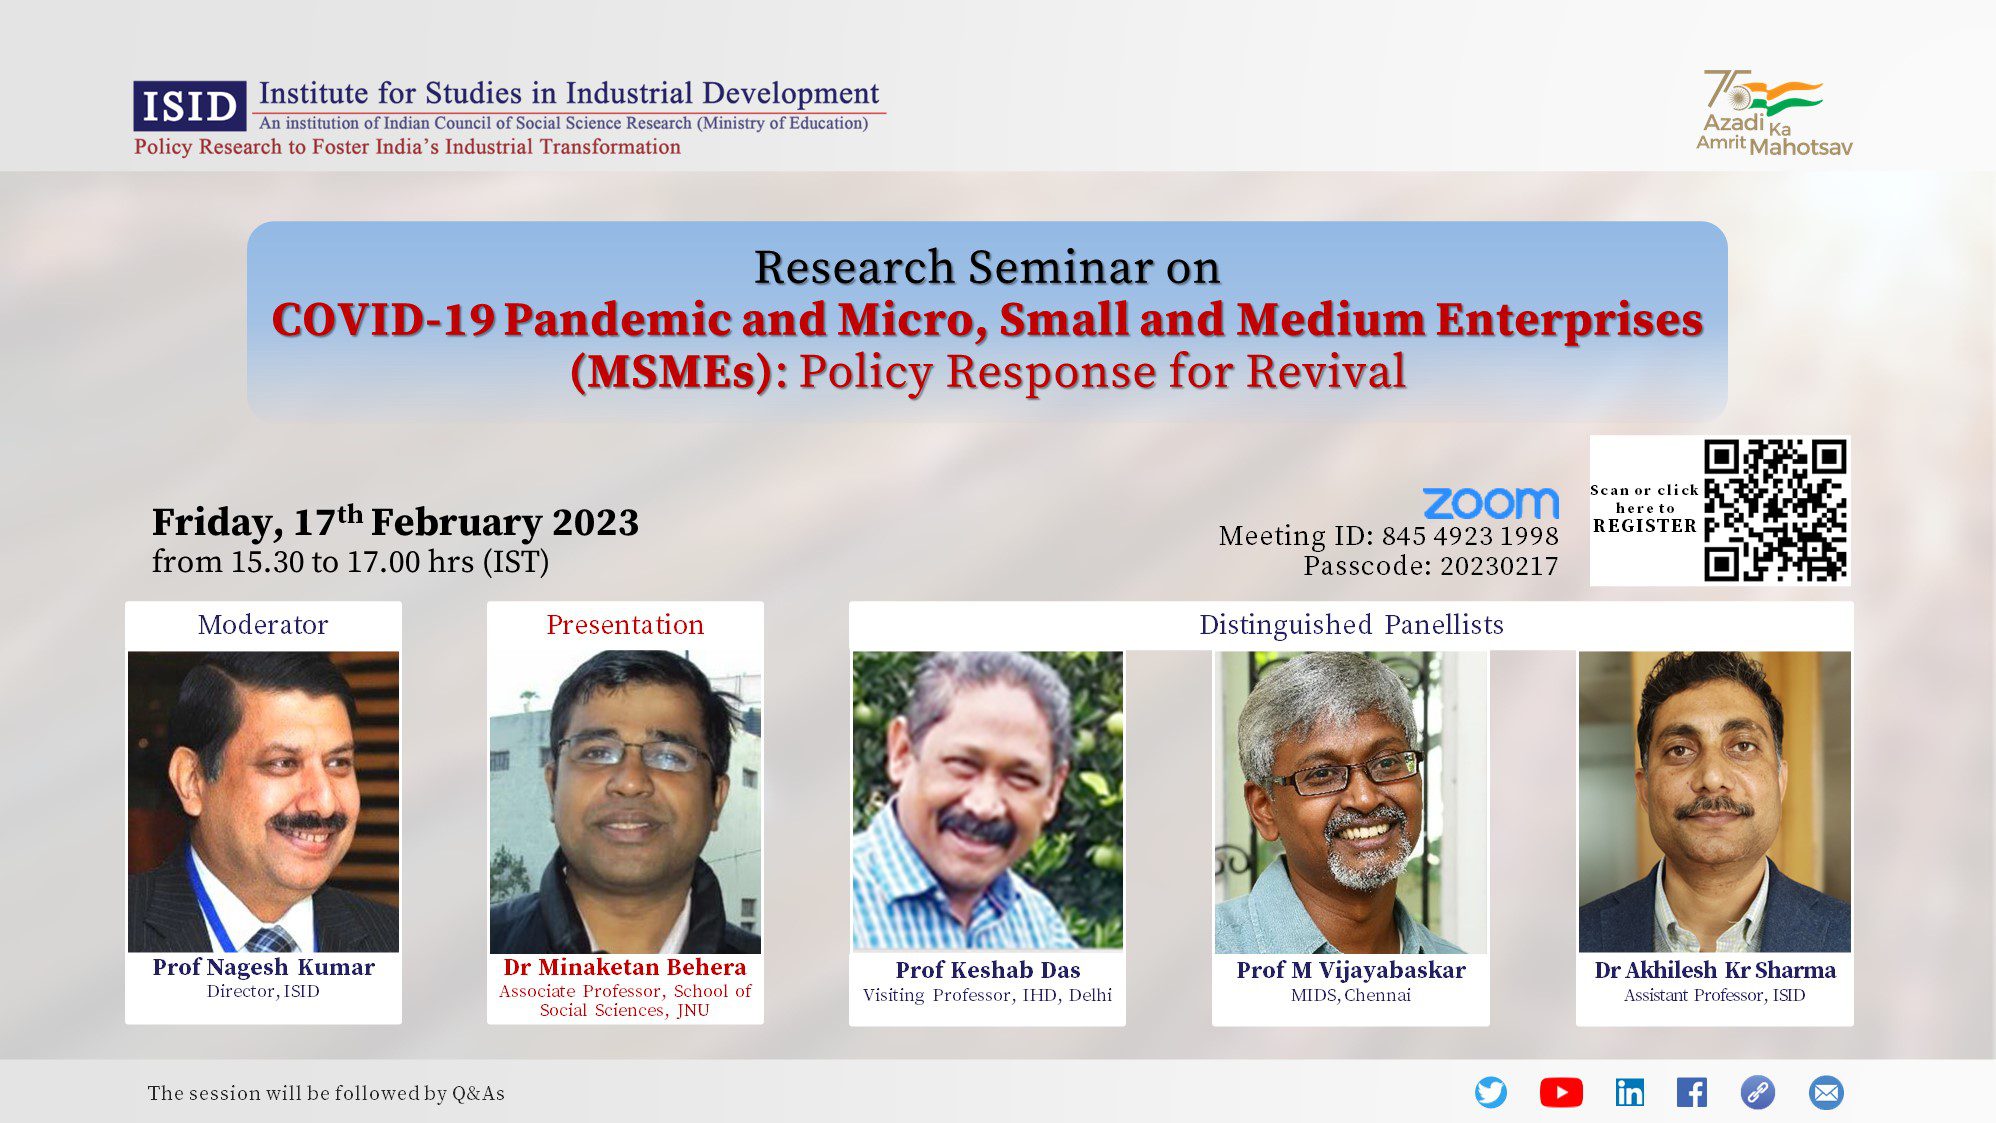 Research Seminar on COVID-19 Pandemic and Micro, Small and Medium Enterprises (MSMEs): Policy Response for Revival